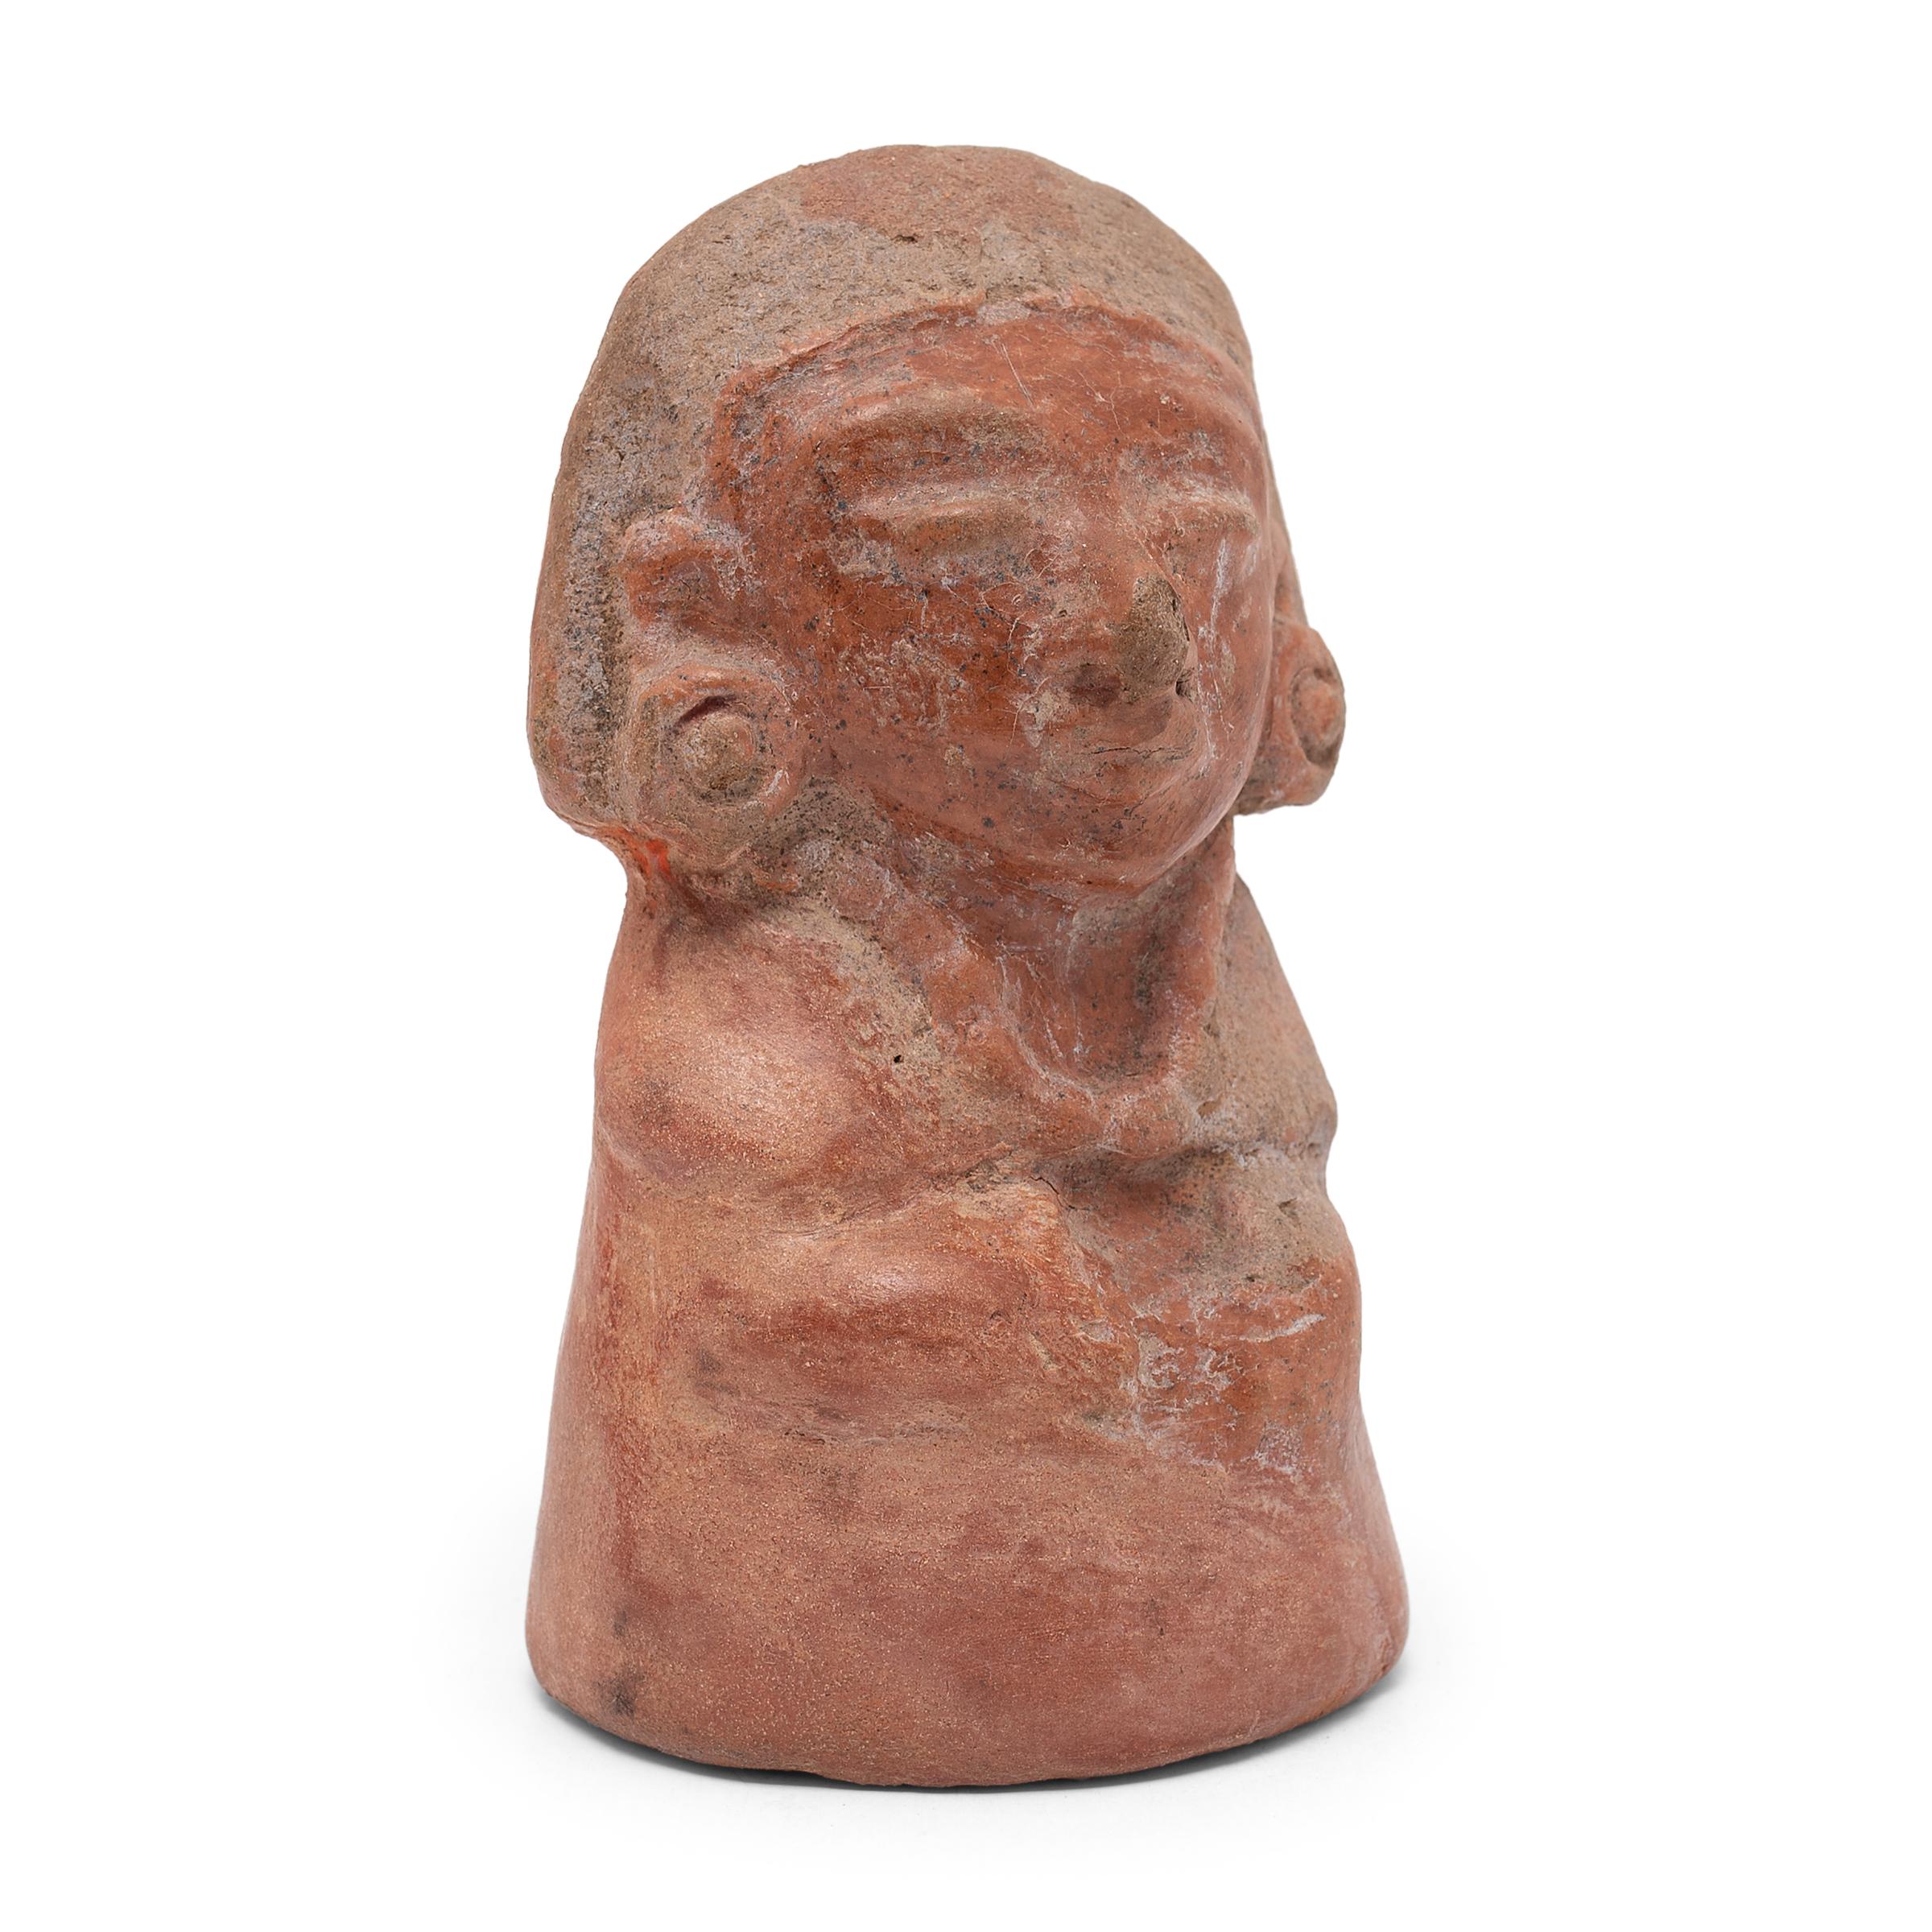 This intriguing redware figure was crafted in 400 A.D. from the ancient Teotihuacan region of Mexico. Earthenware figurines were made in great abundance throughout Teotihuacan's history. After 250 A.D. objects made from clay increased dramatically,